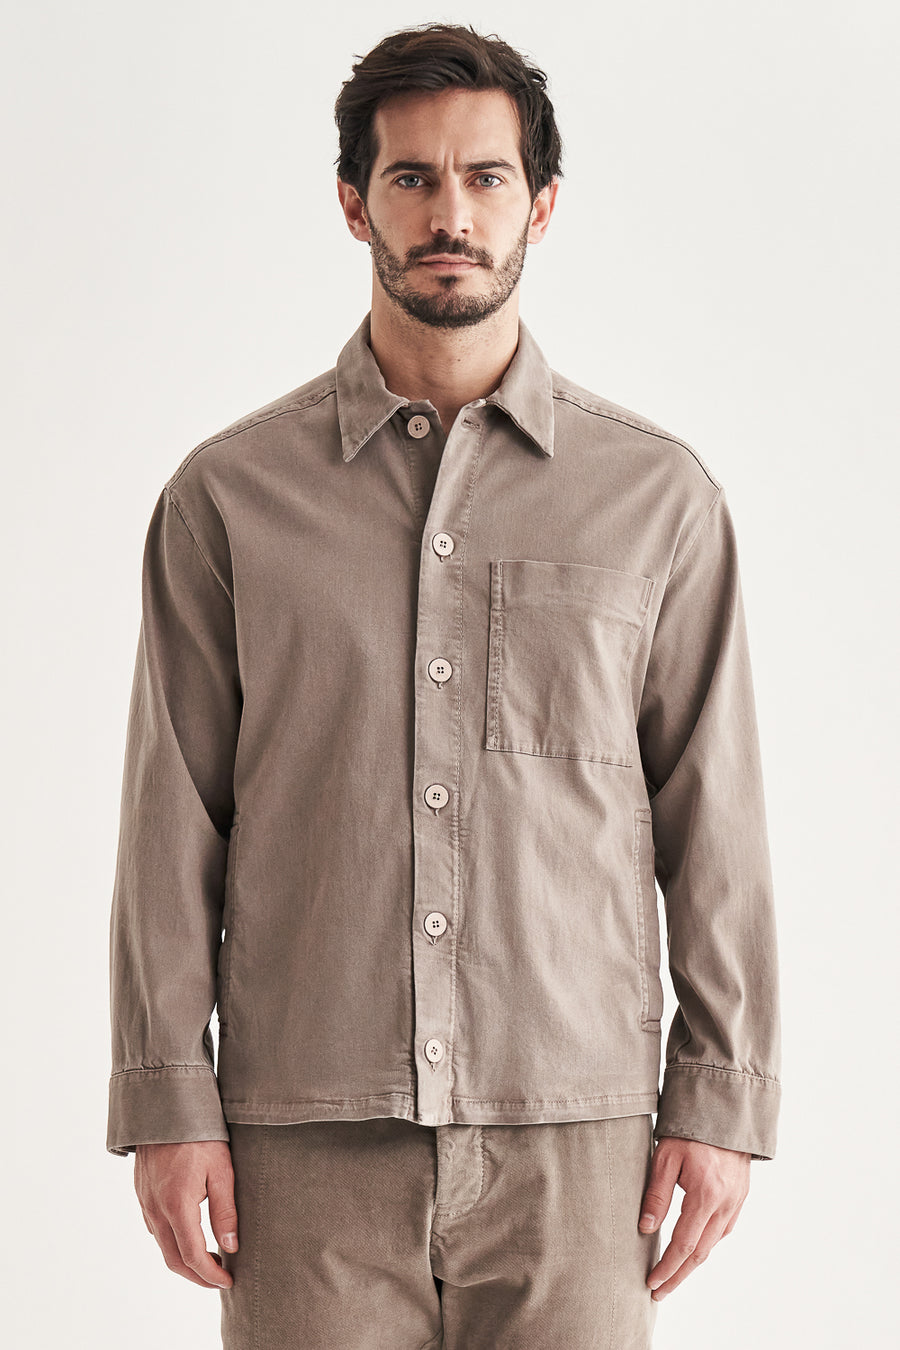 Buy the Transit Tencel/Modal Buttoned Overshirt in Beige at Intro. Spend £50 for free UK delivery. Official stockists. We ship worldwide.